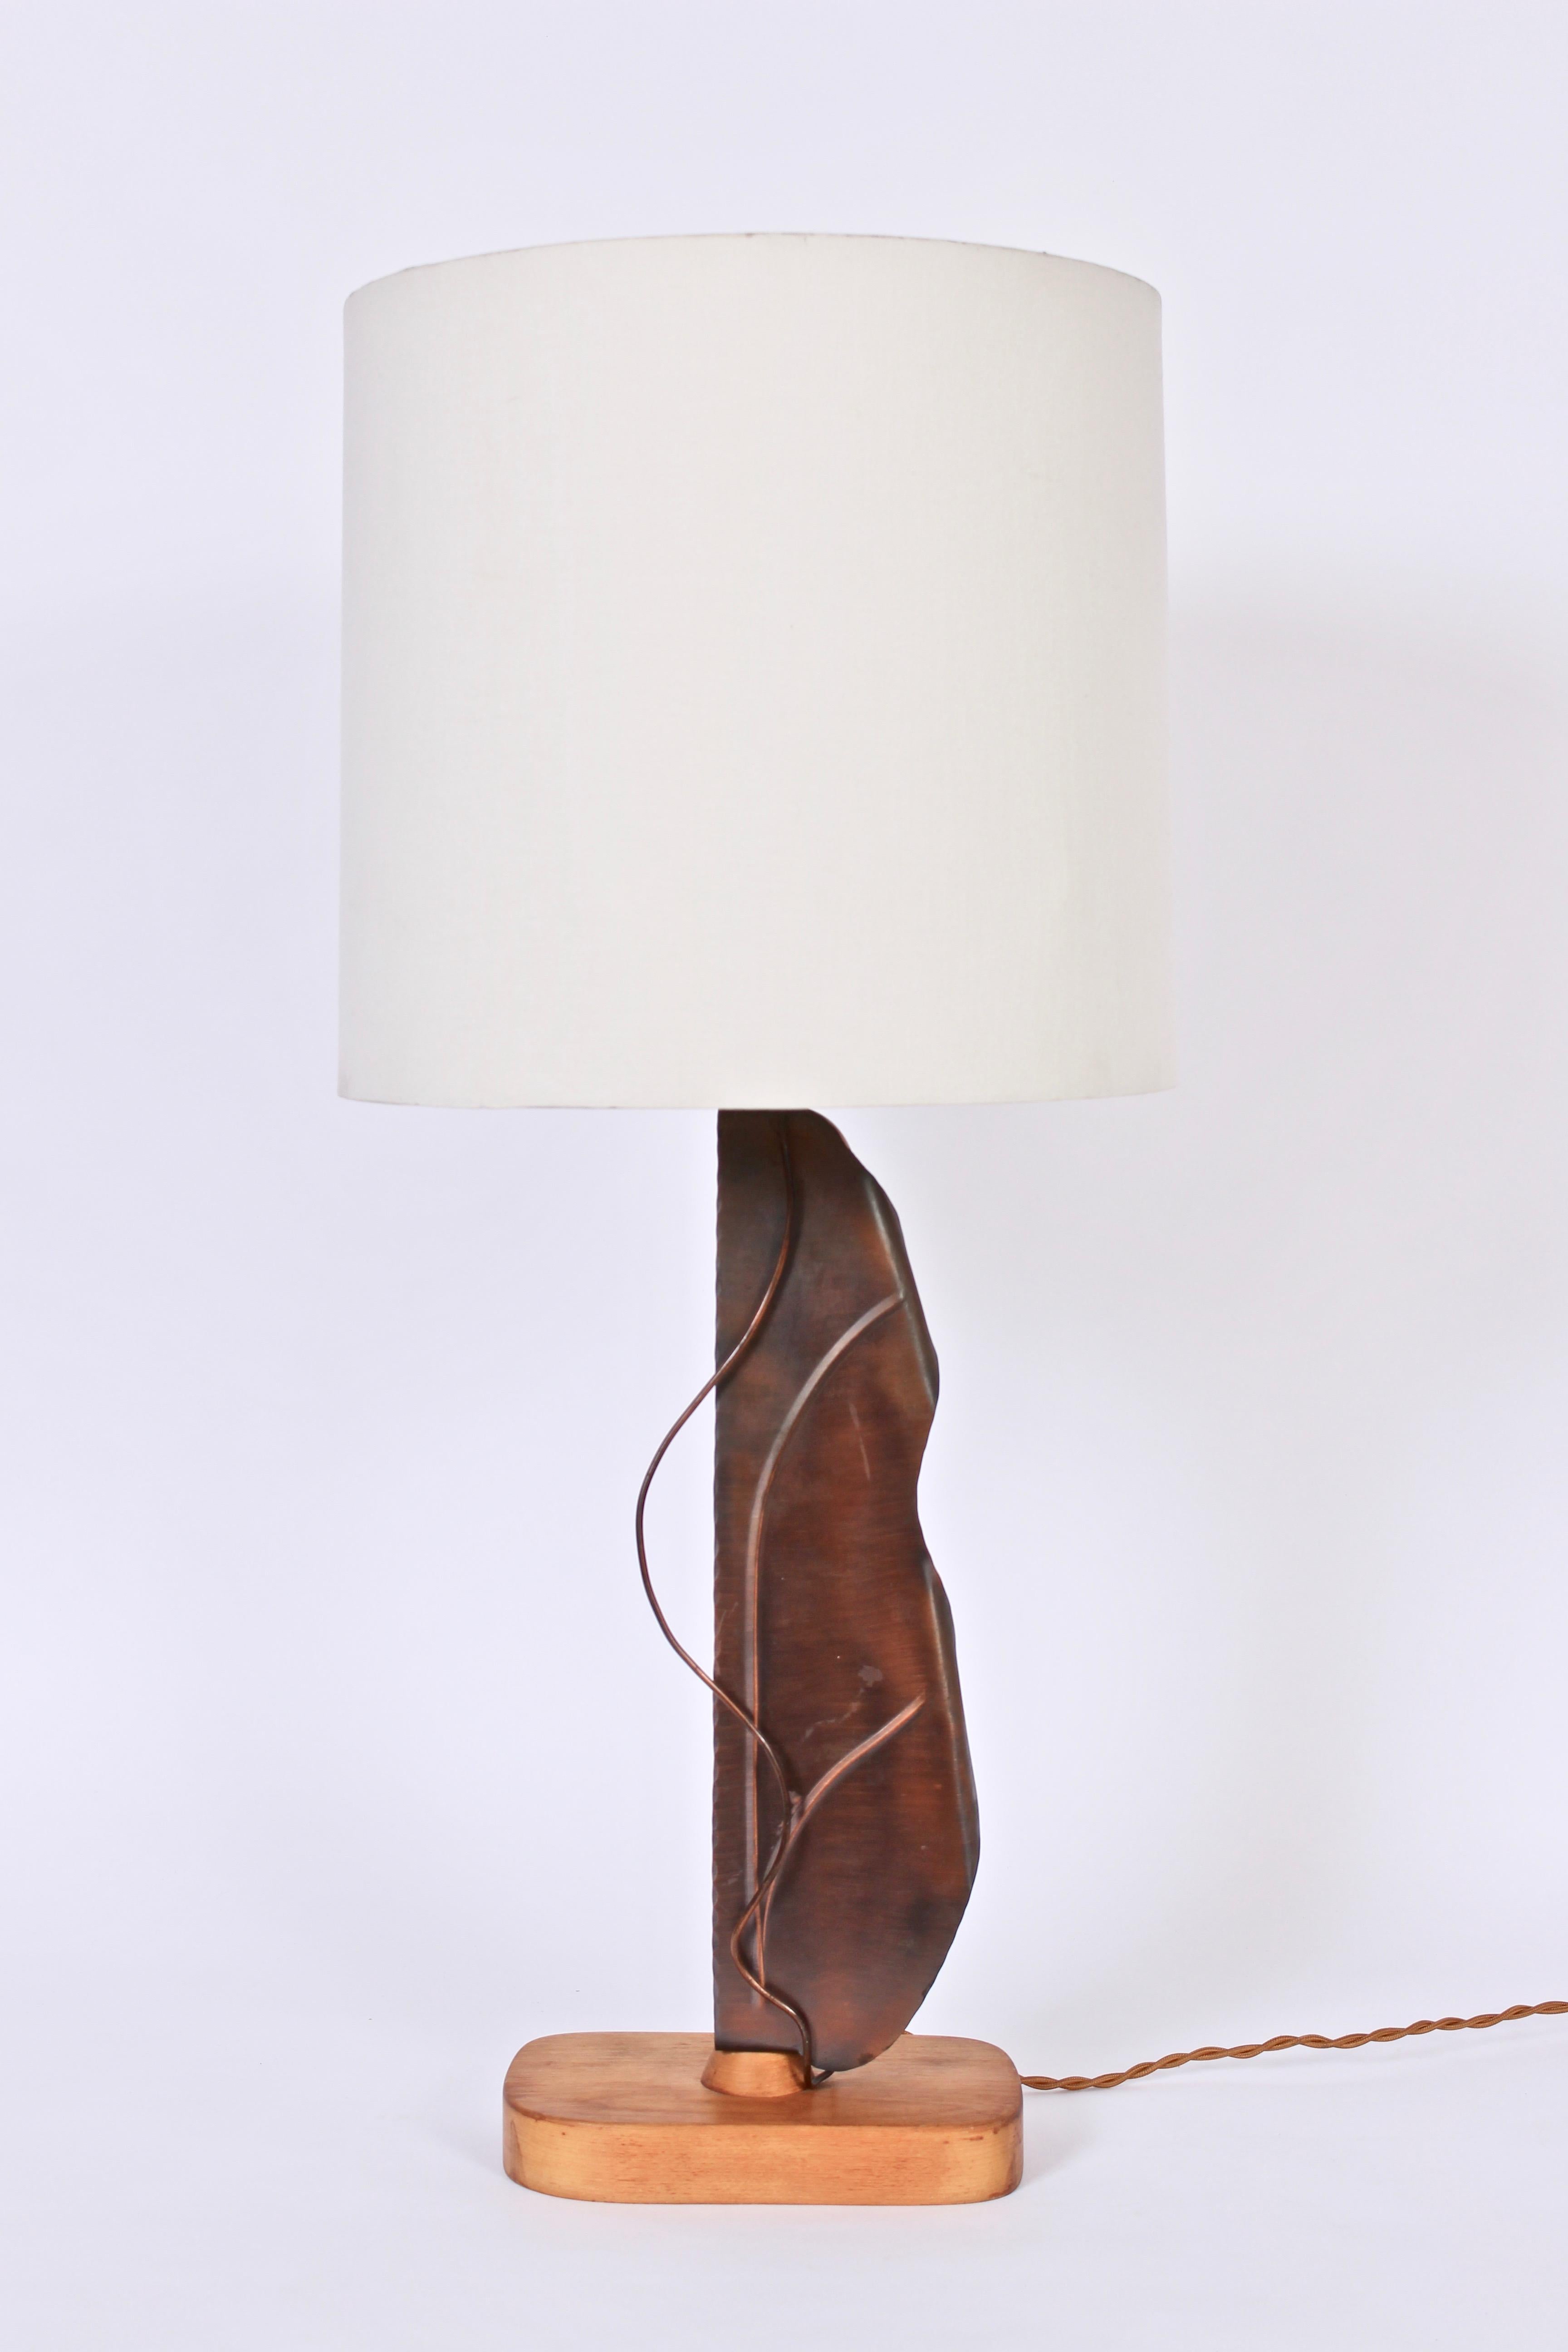 Tall Yasha Heifetz Abstract Copper & Bleached Mahogany Table Lamp, circa 1950 For Sale 2